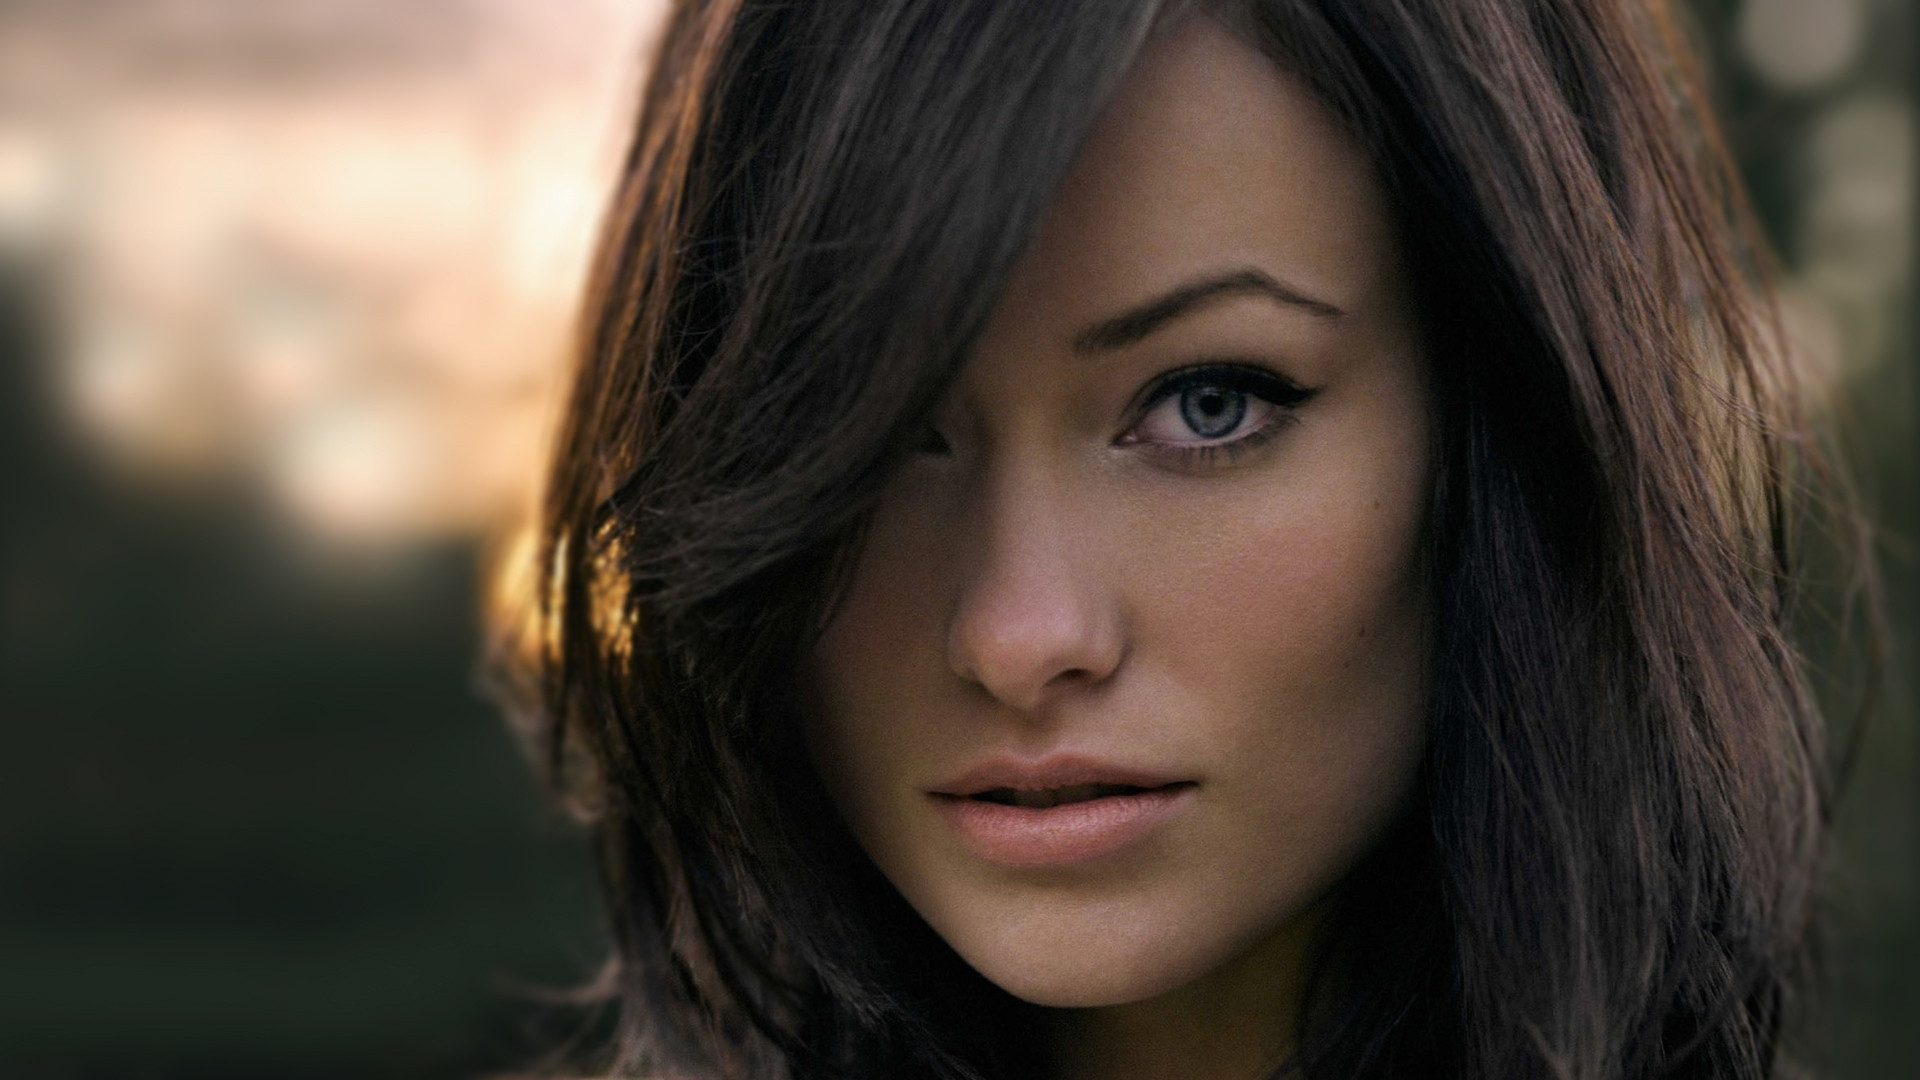 Download full size incredibly sexy Olivia Wilde wallpaper / 1920x1080